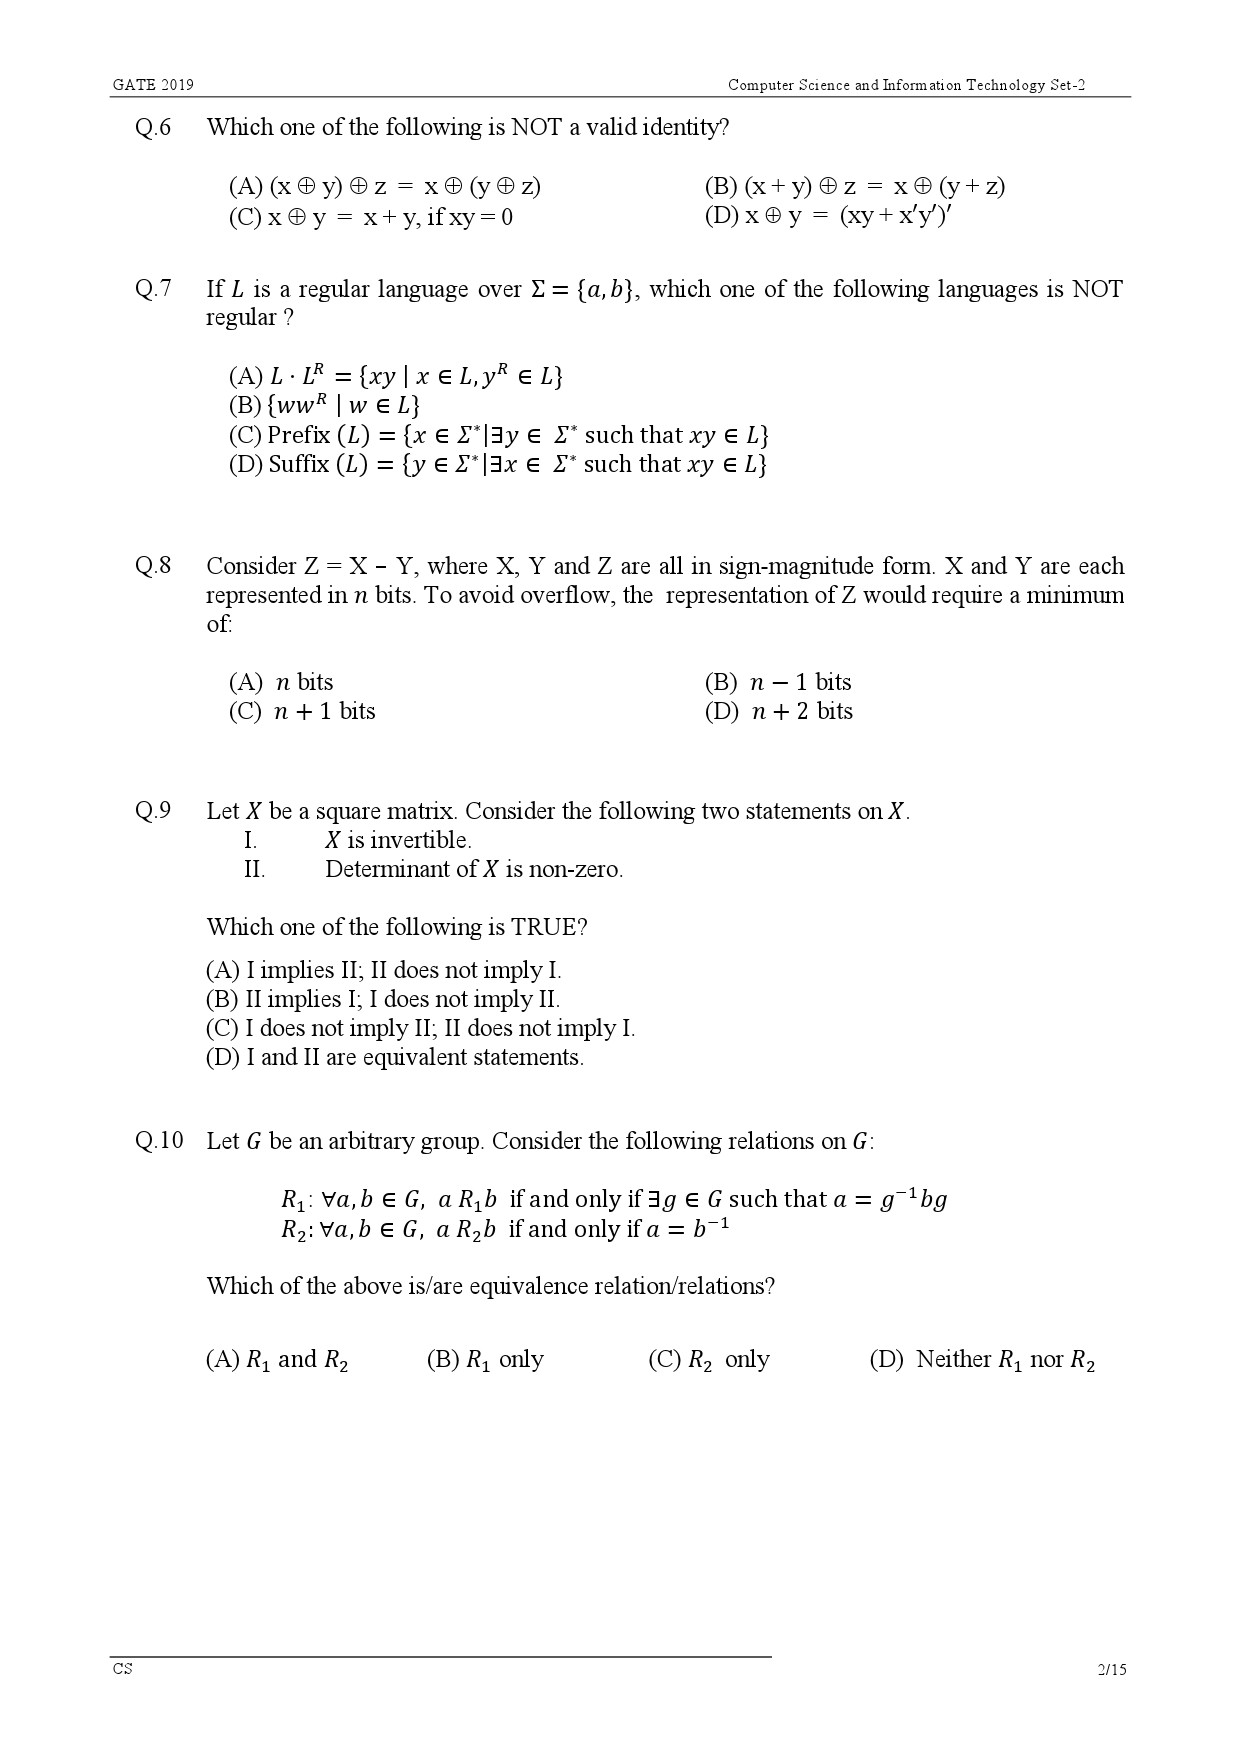 GATE Exam Question Paper 2019 Computer Science and Information Technology 5